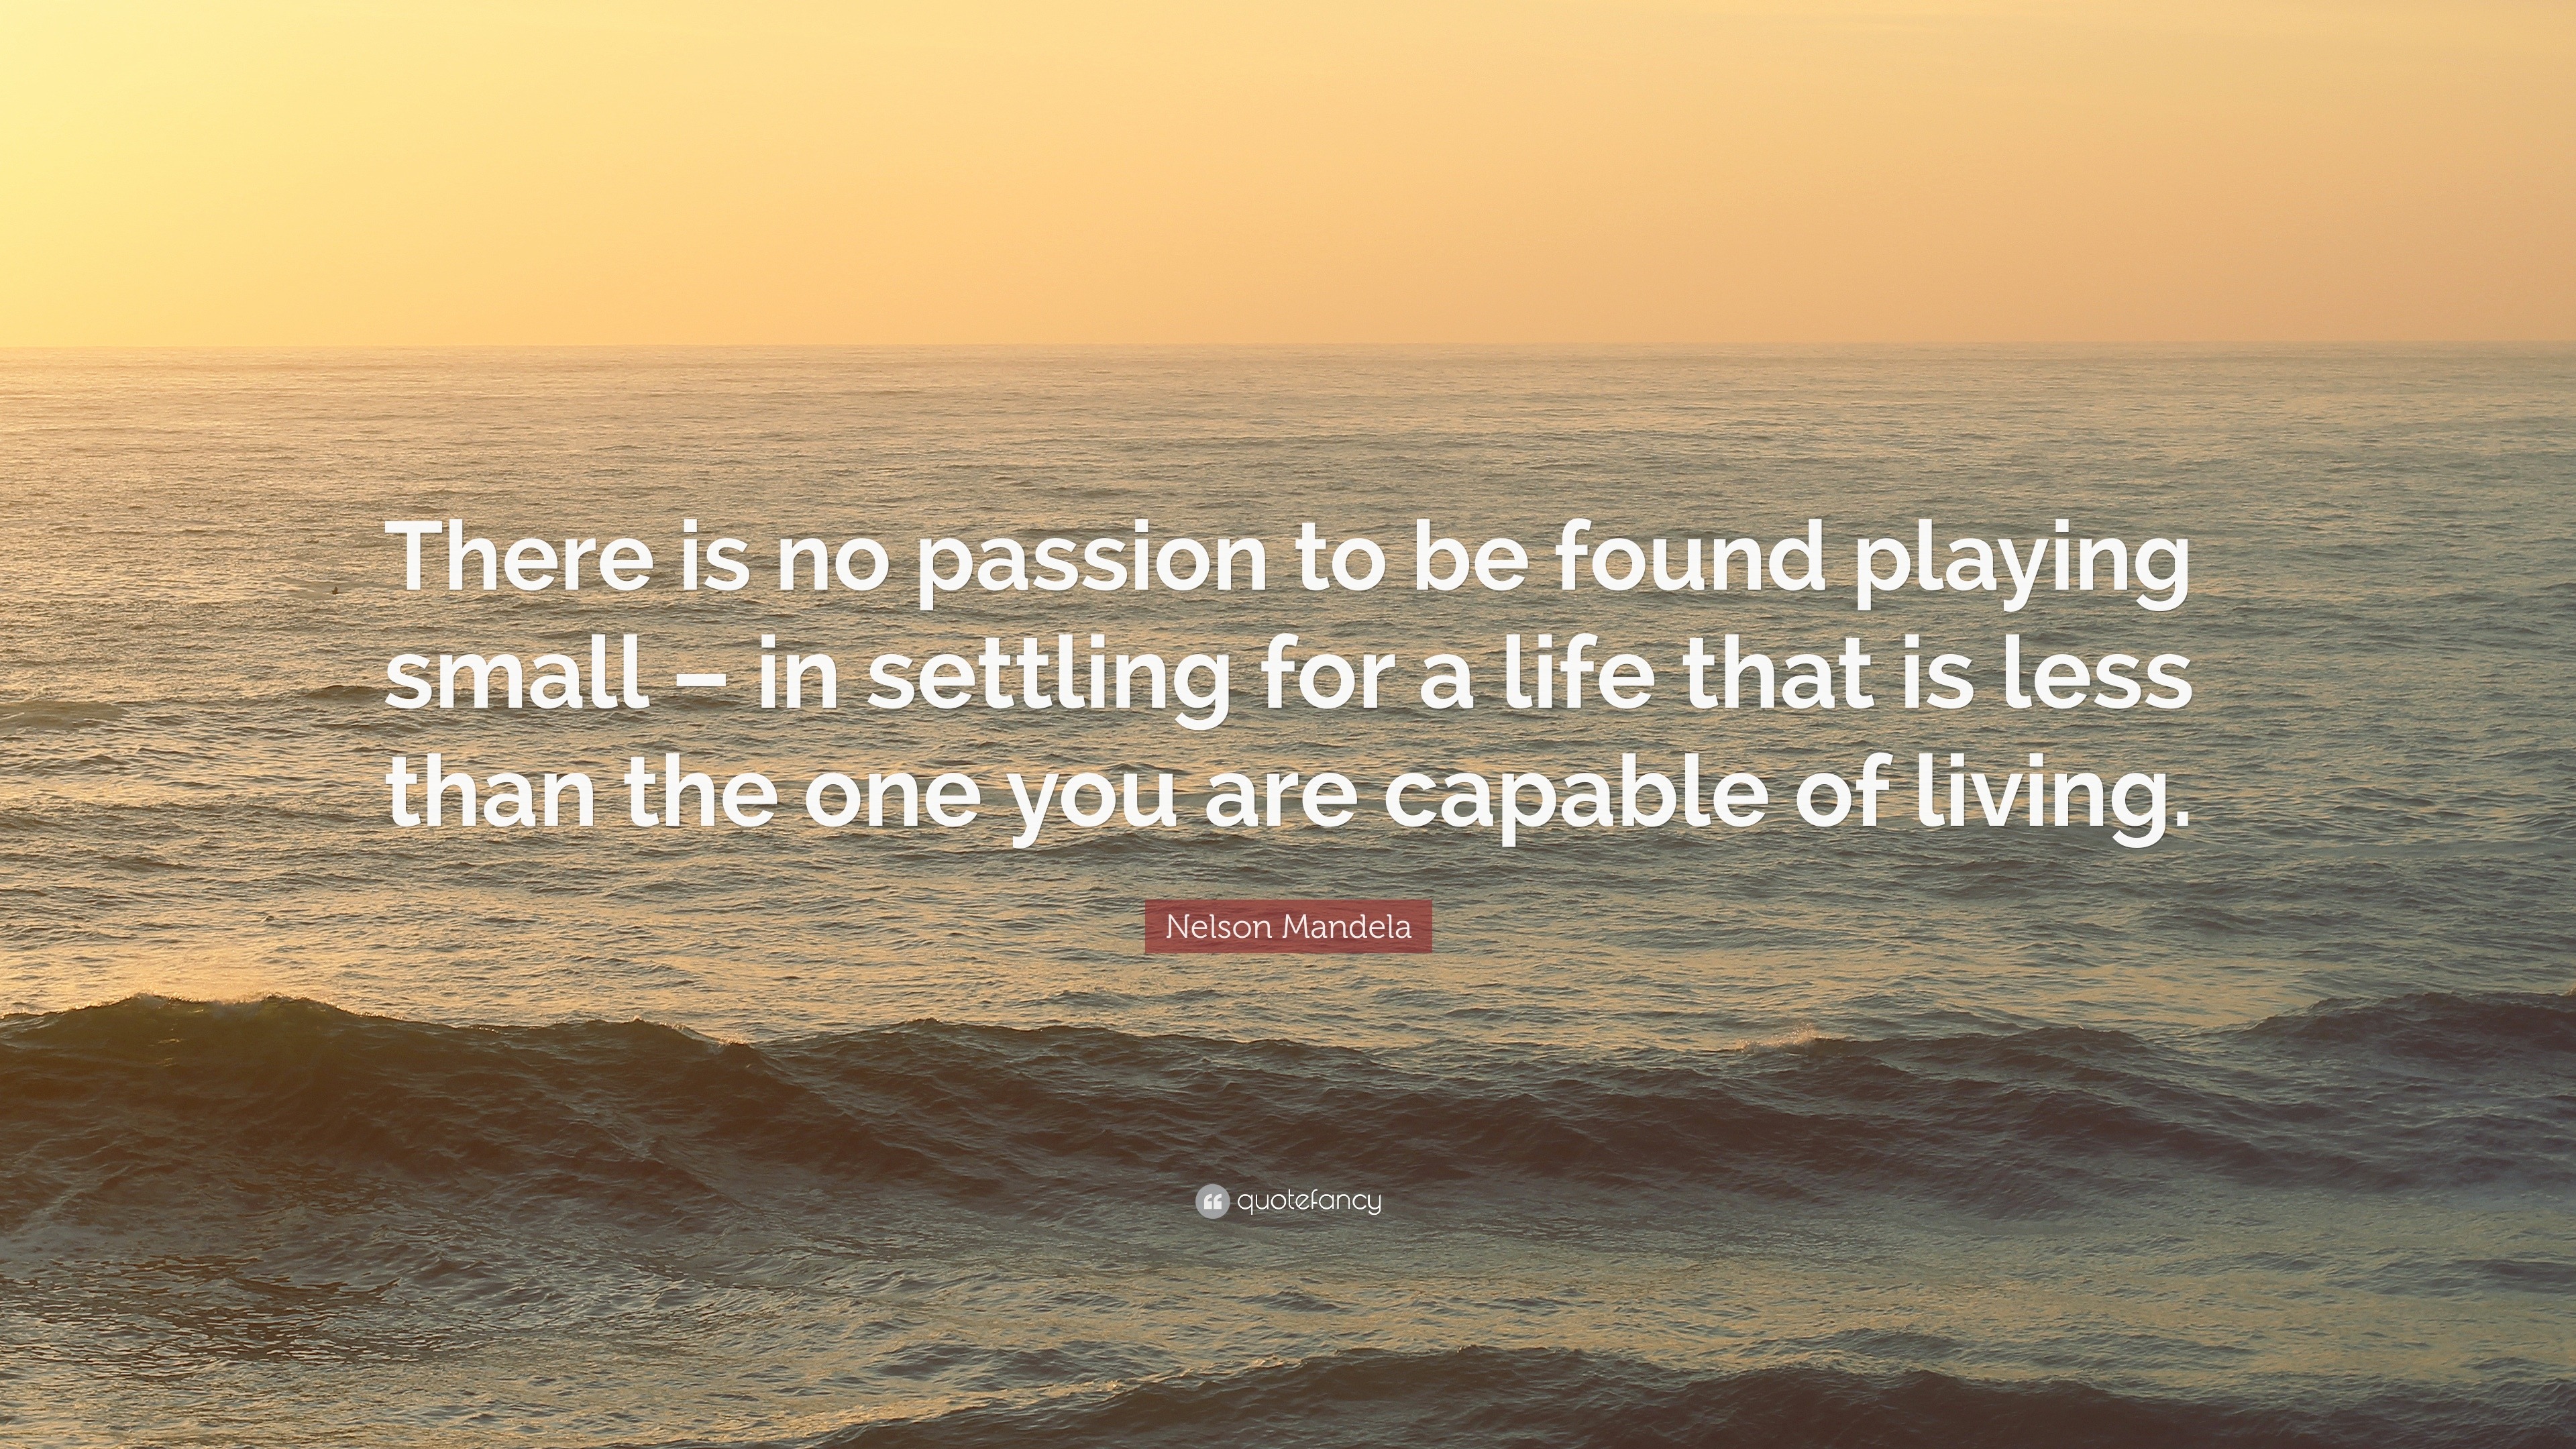 Nelson Mandela Quote: “There is no passion to be found playing small